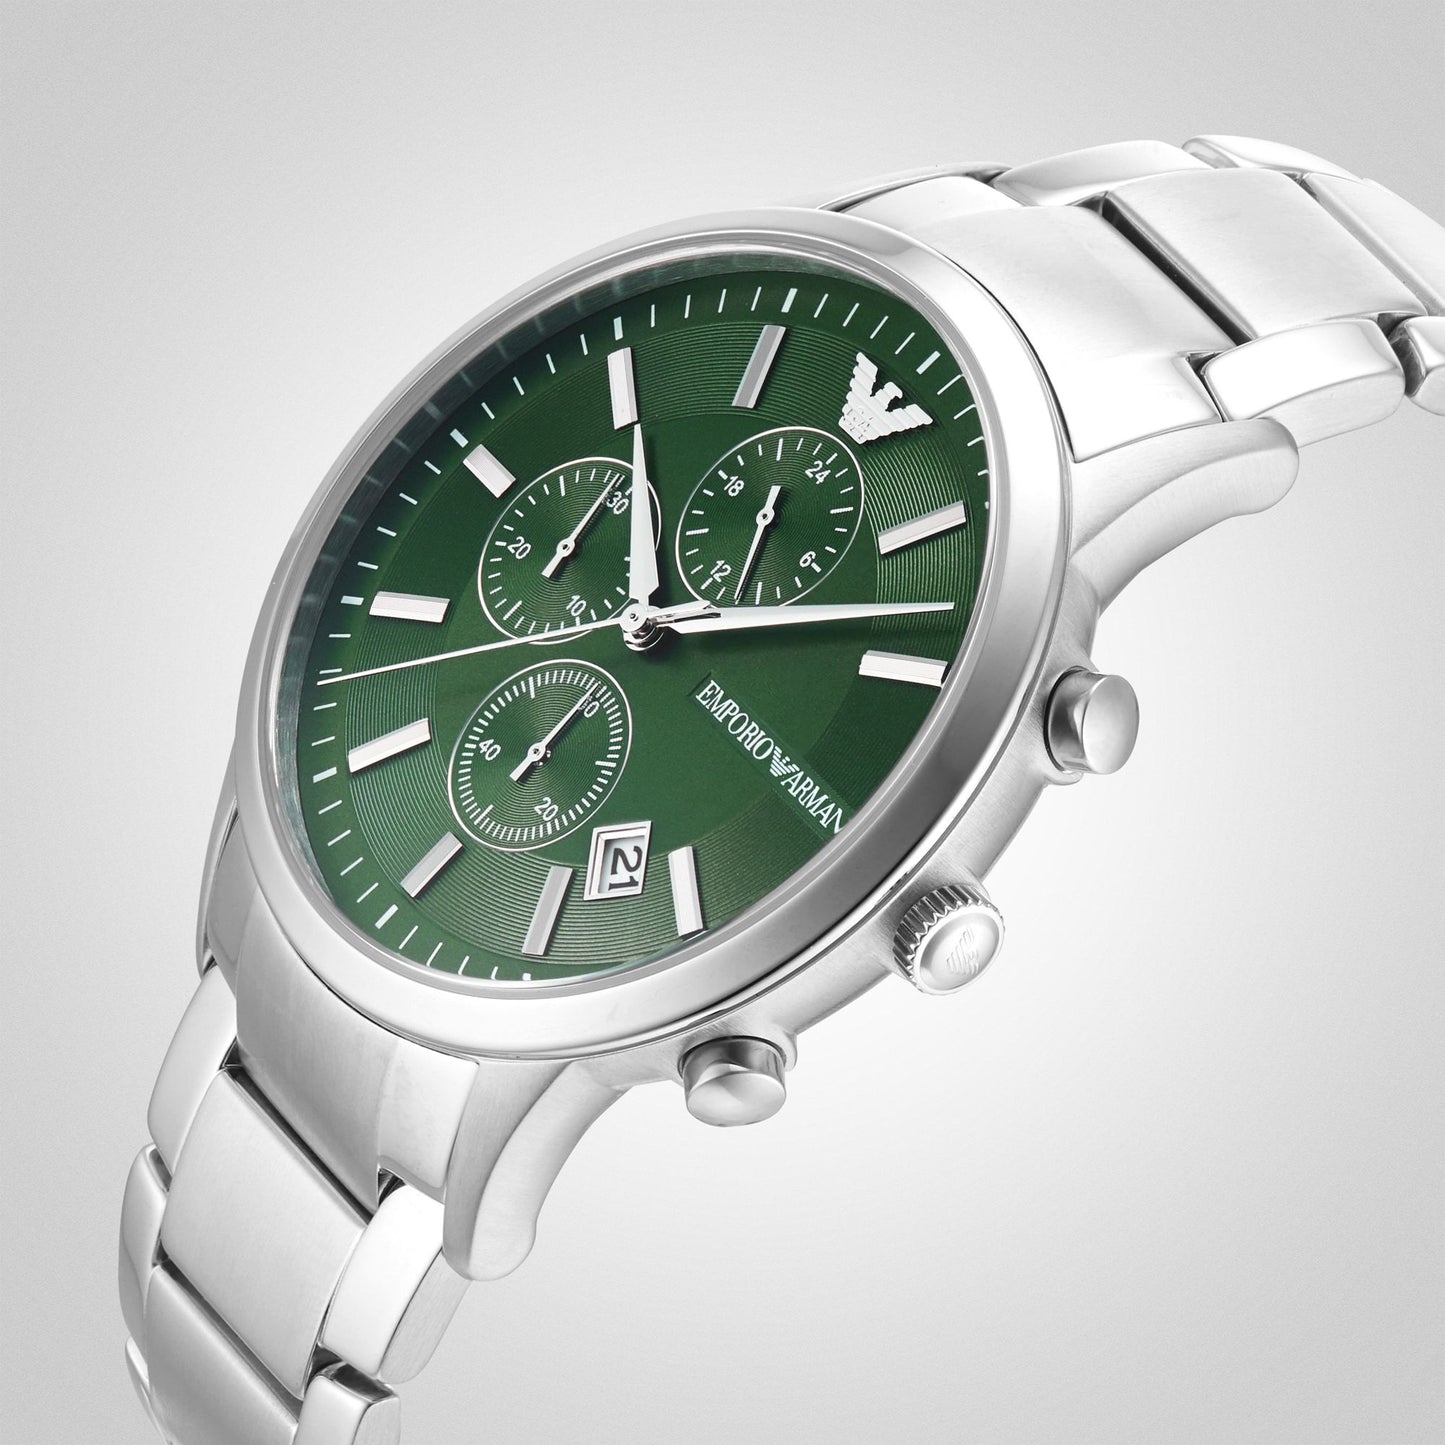 Emporio Armani Green Dial Stainless Steel Men's Chronograph Watch- AR11507